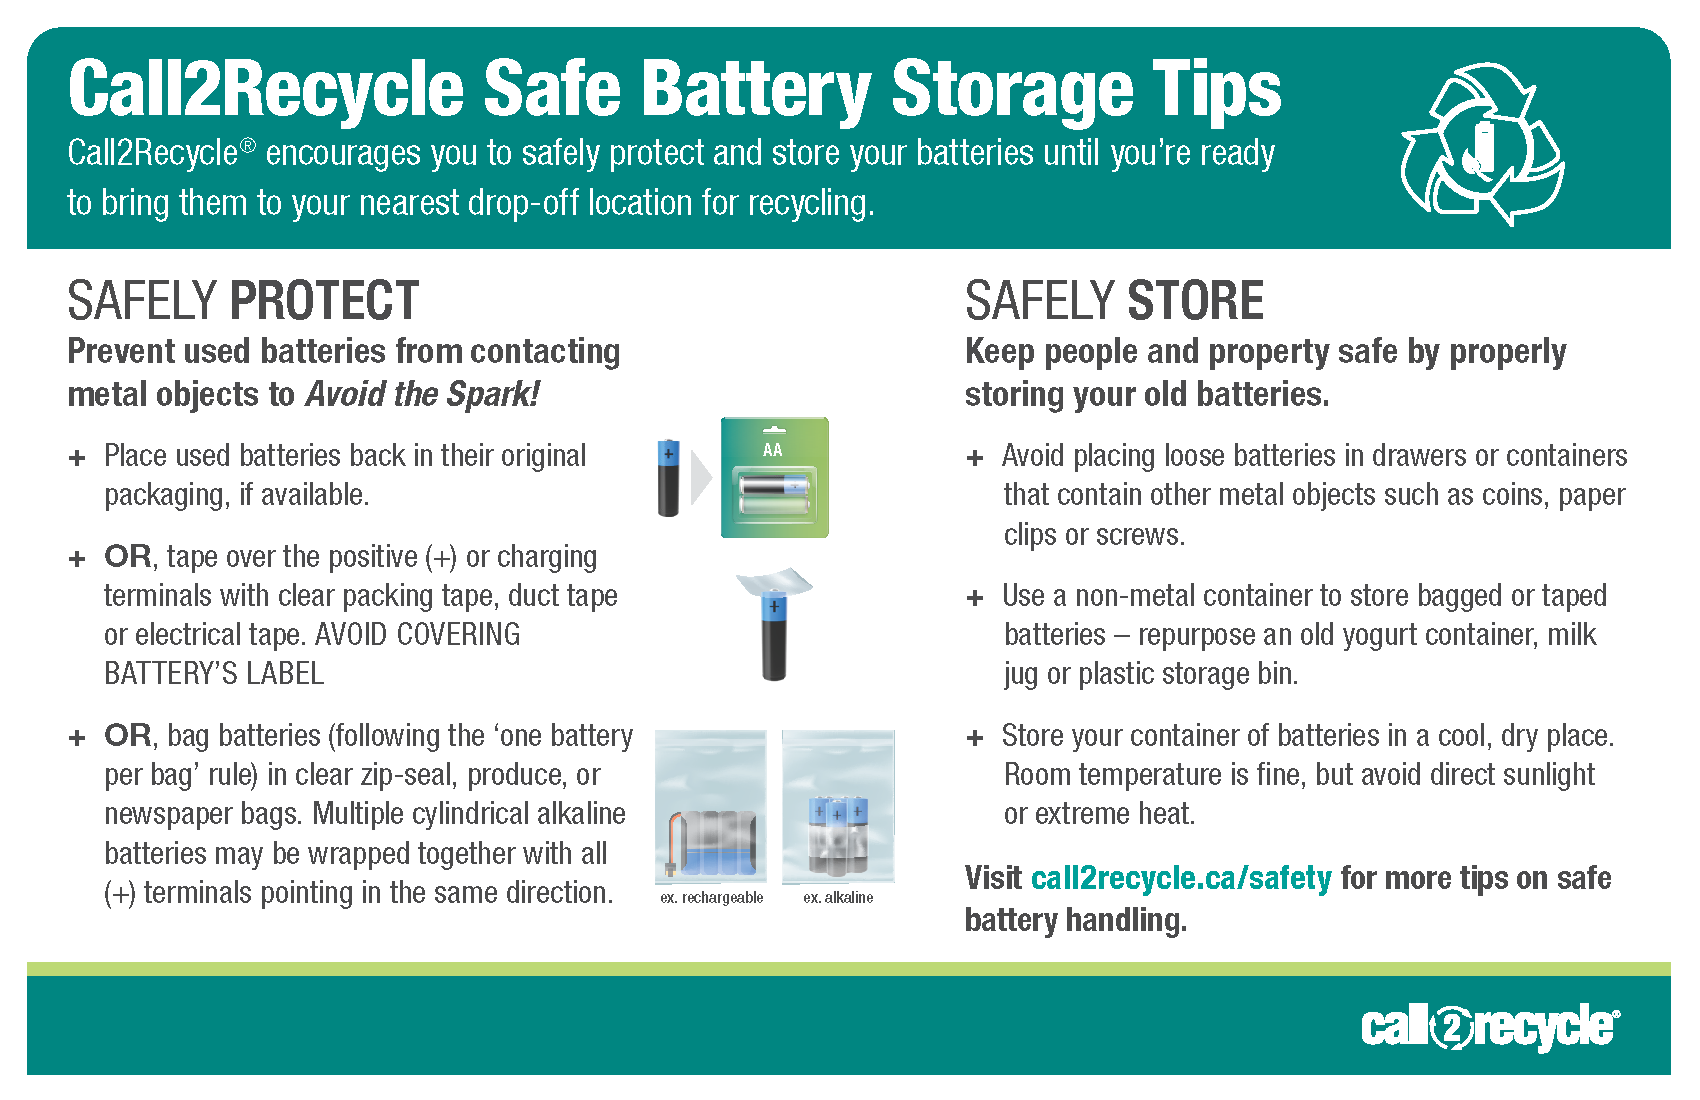 Call 2 Recycle Safe Handling of Batteries